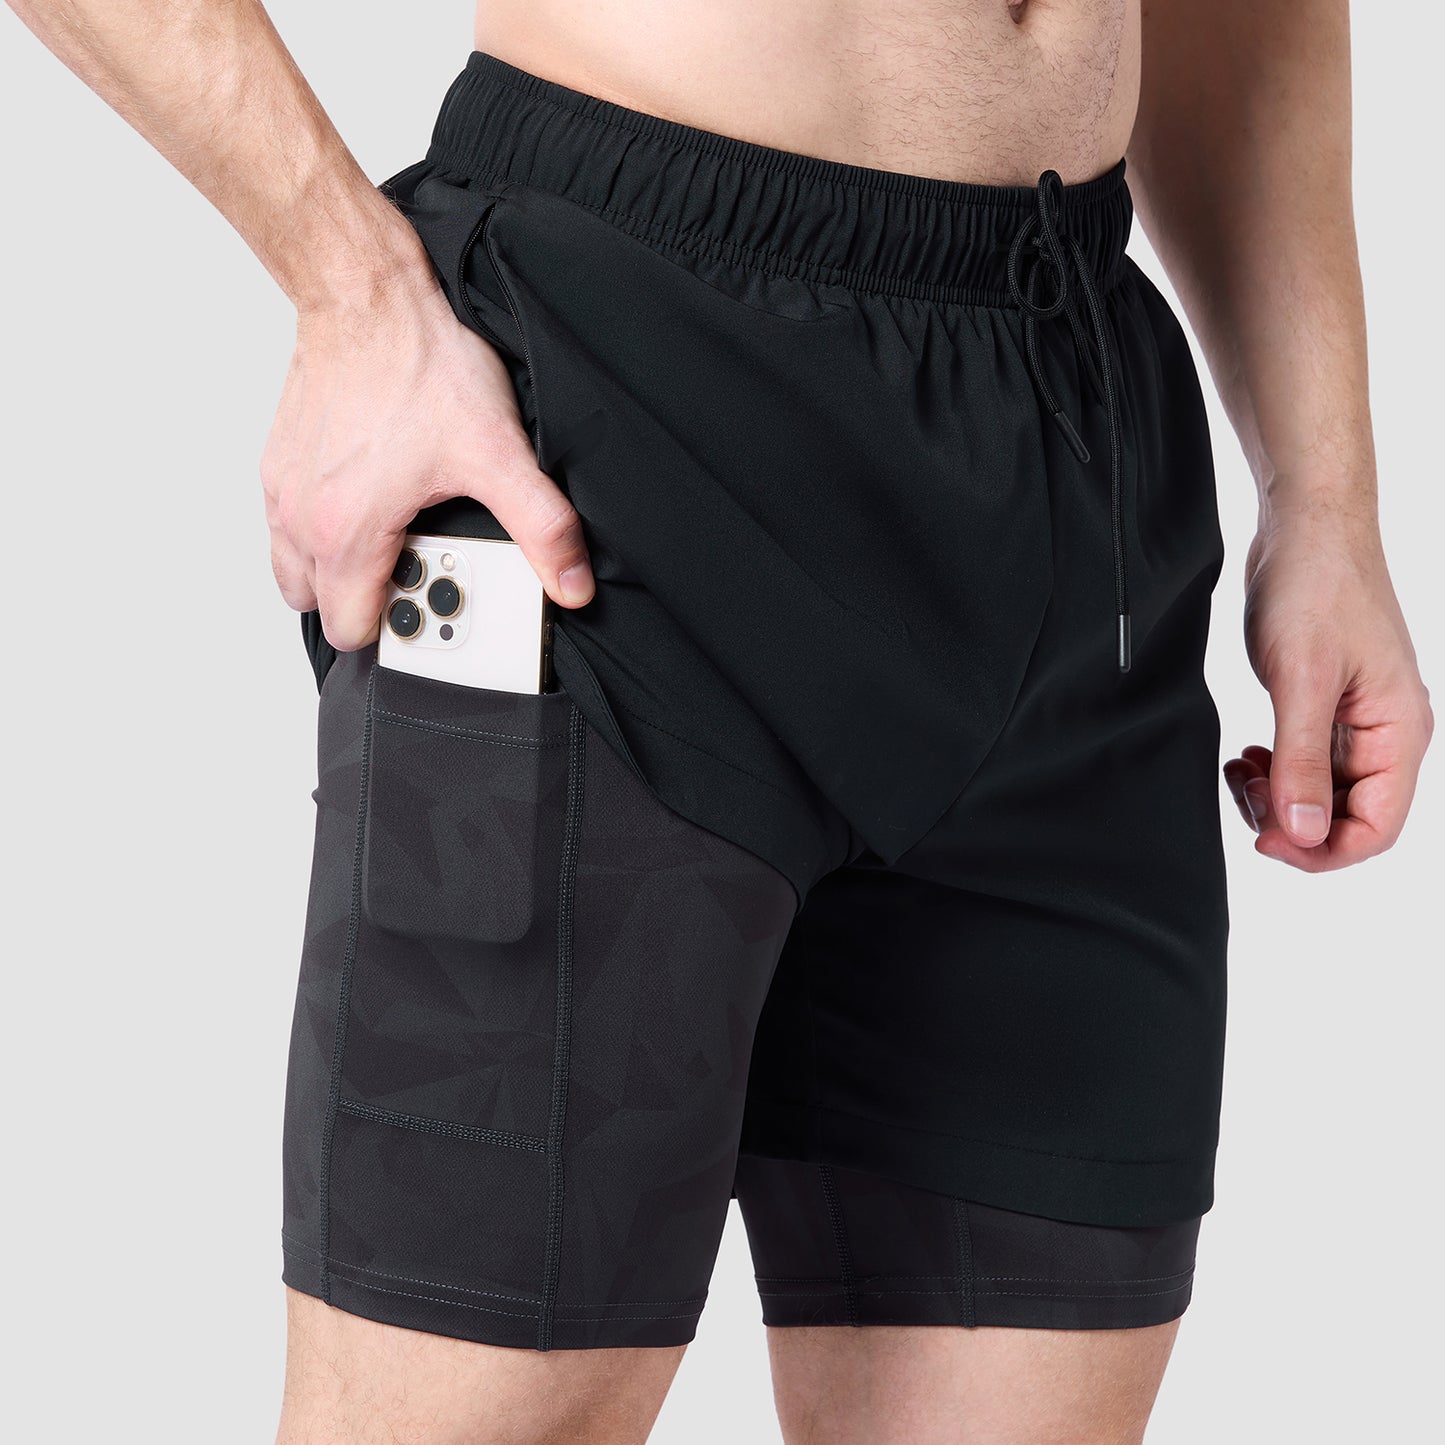 Limitless 2-In-1 7" Shorts - Black Dot Camo